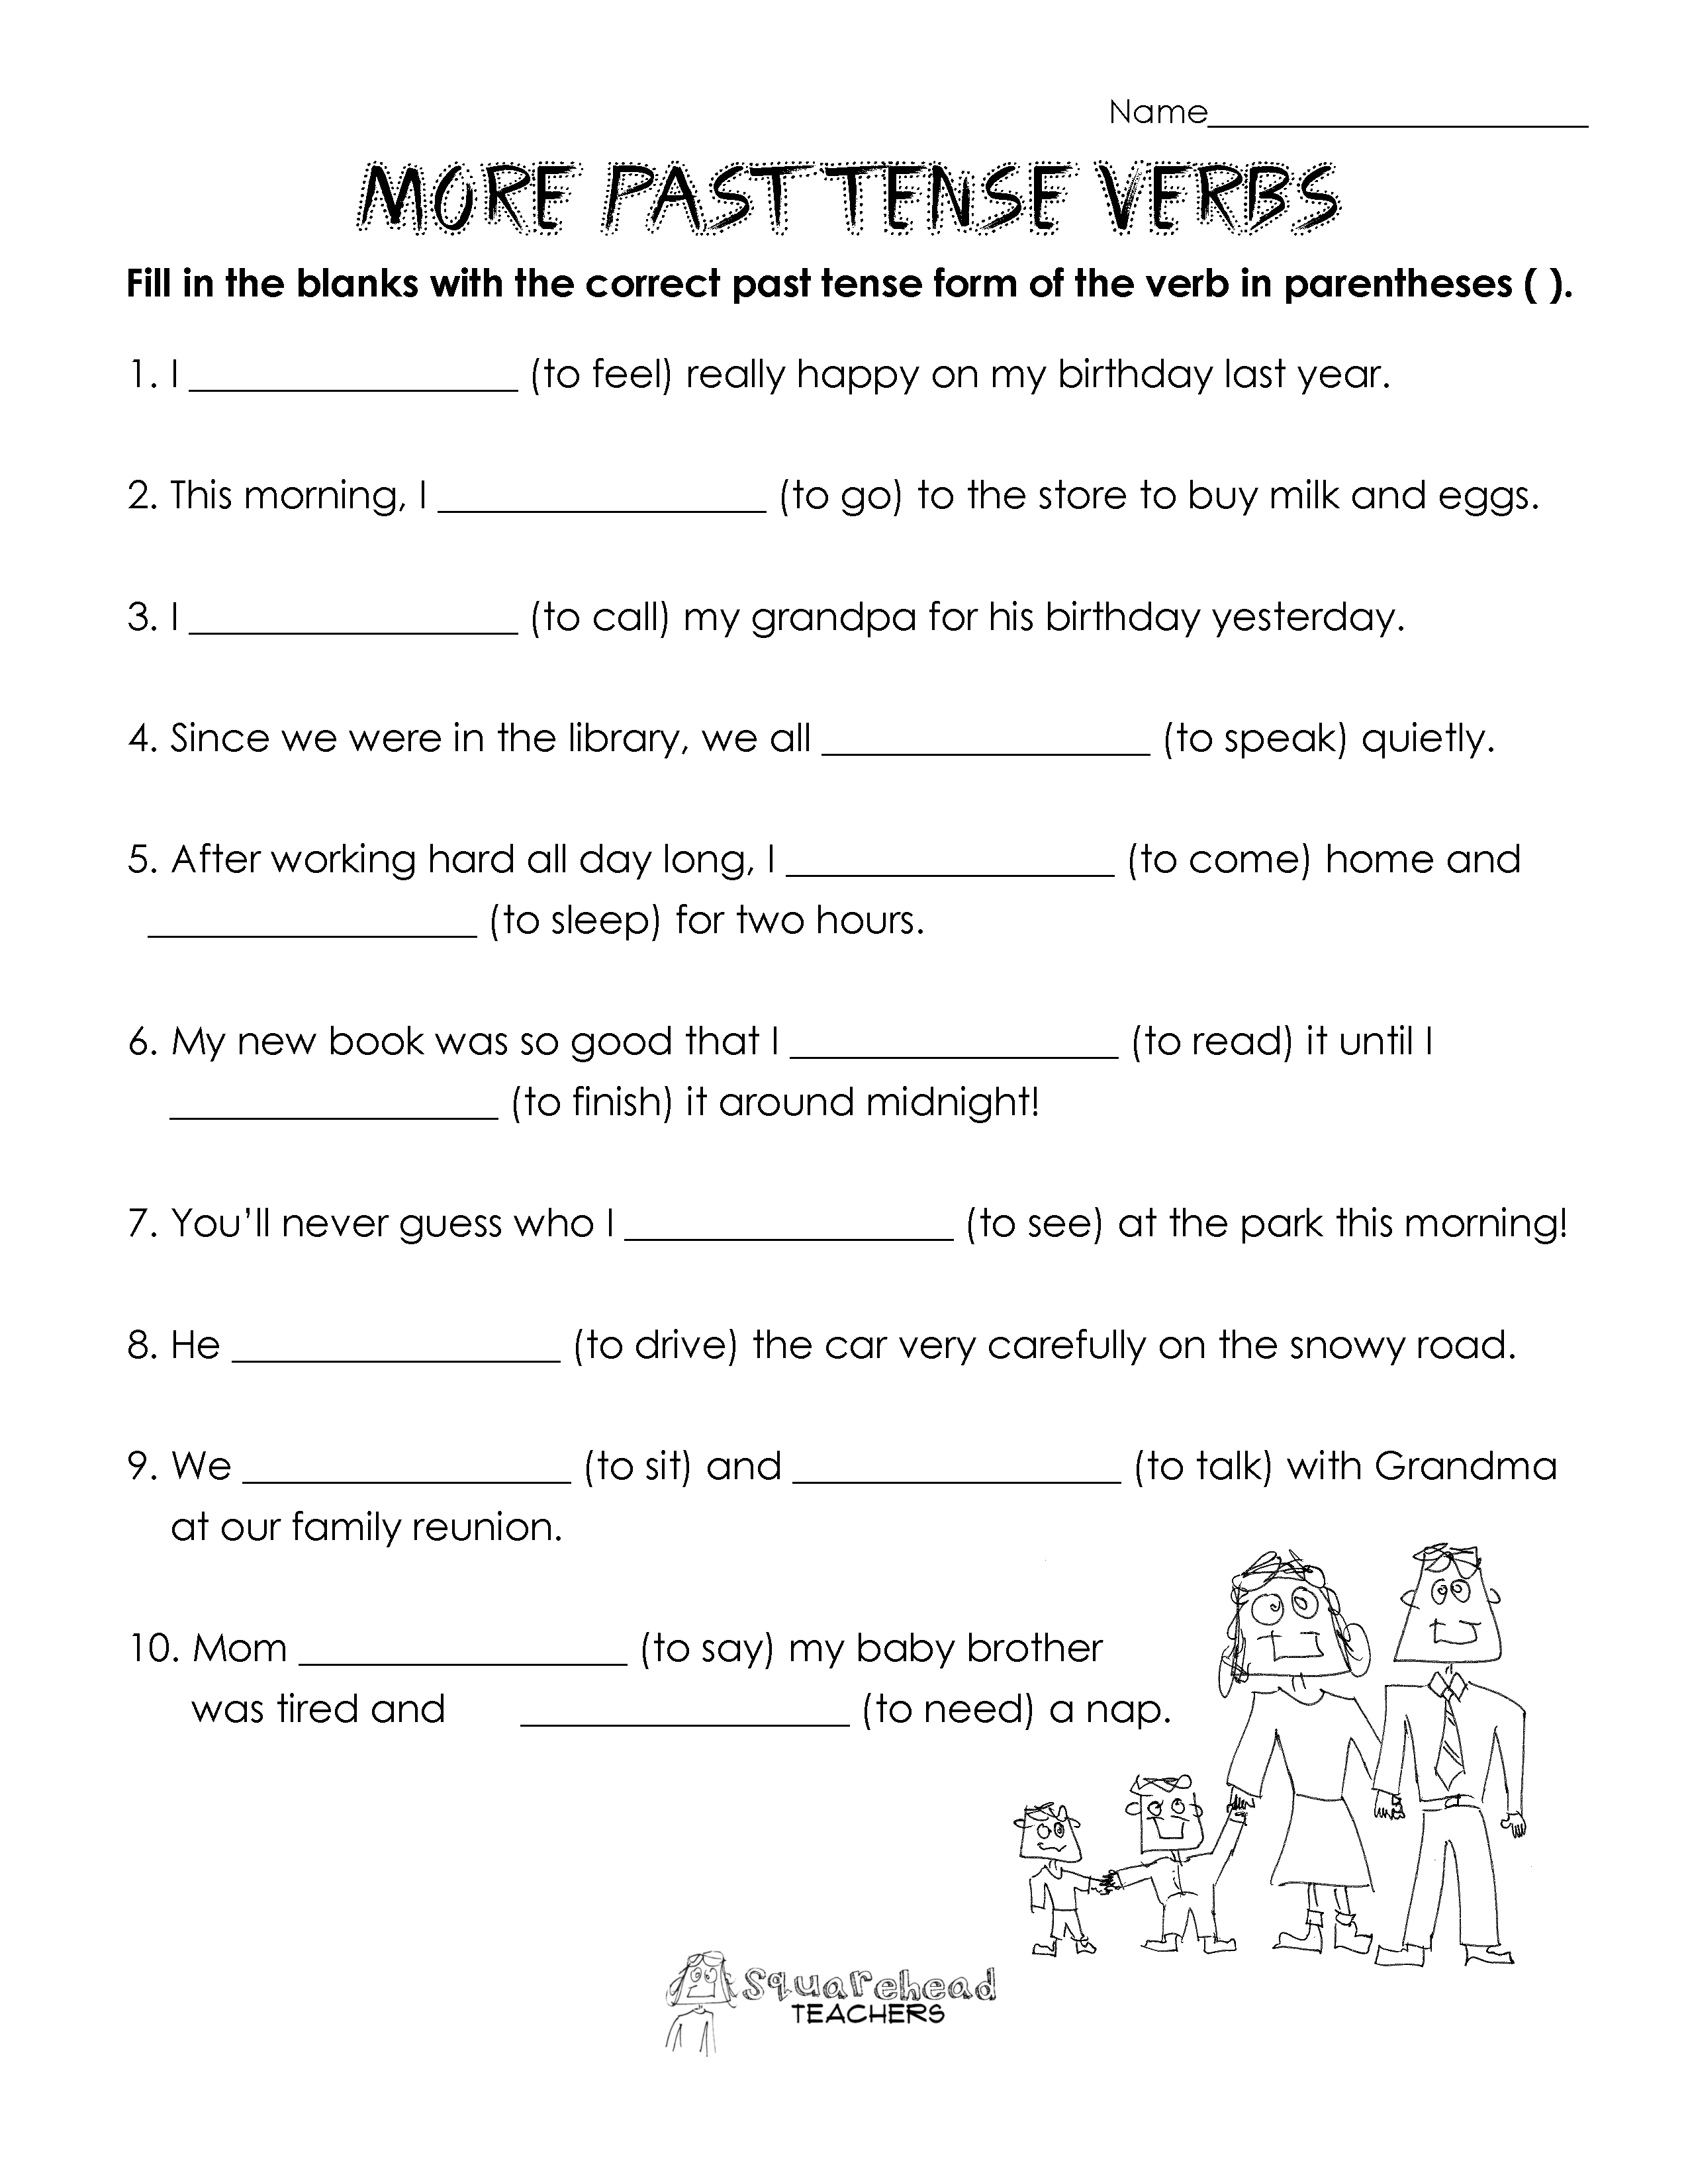 Verb Past Tense Worksheet For Class 3